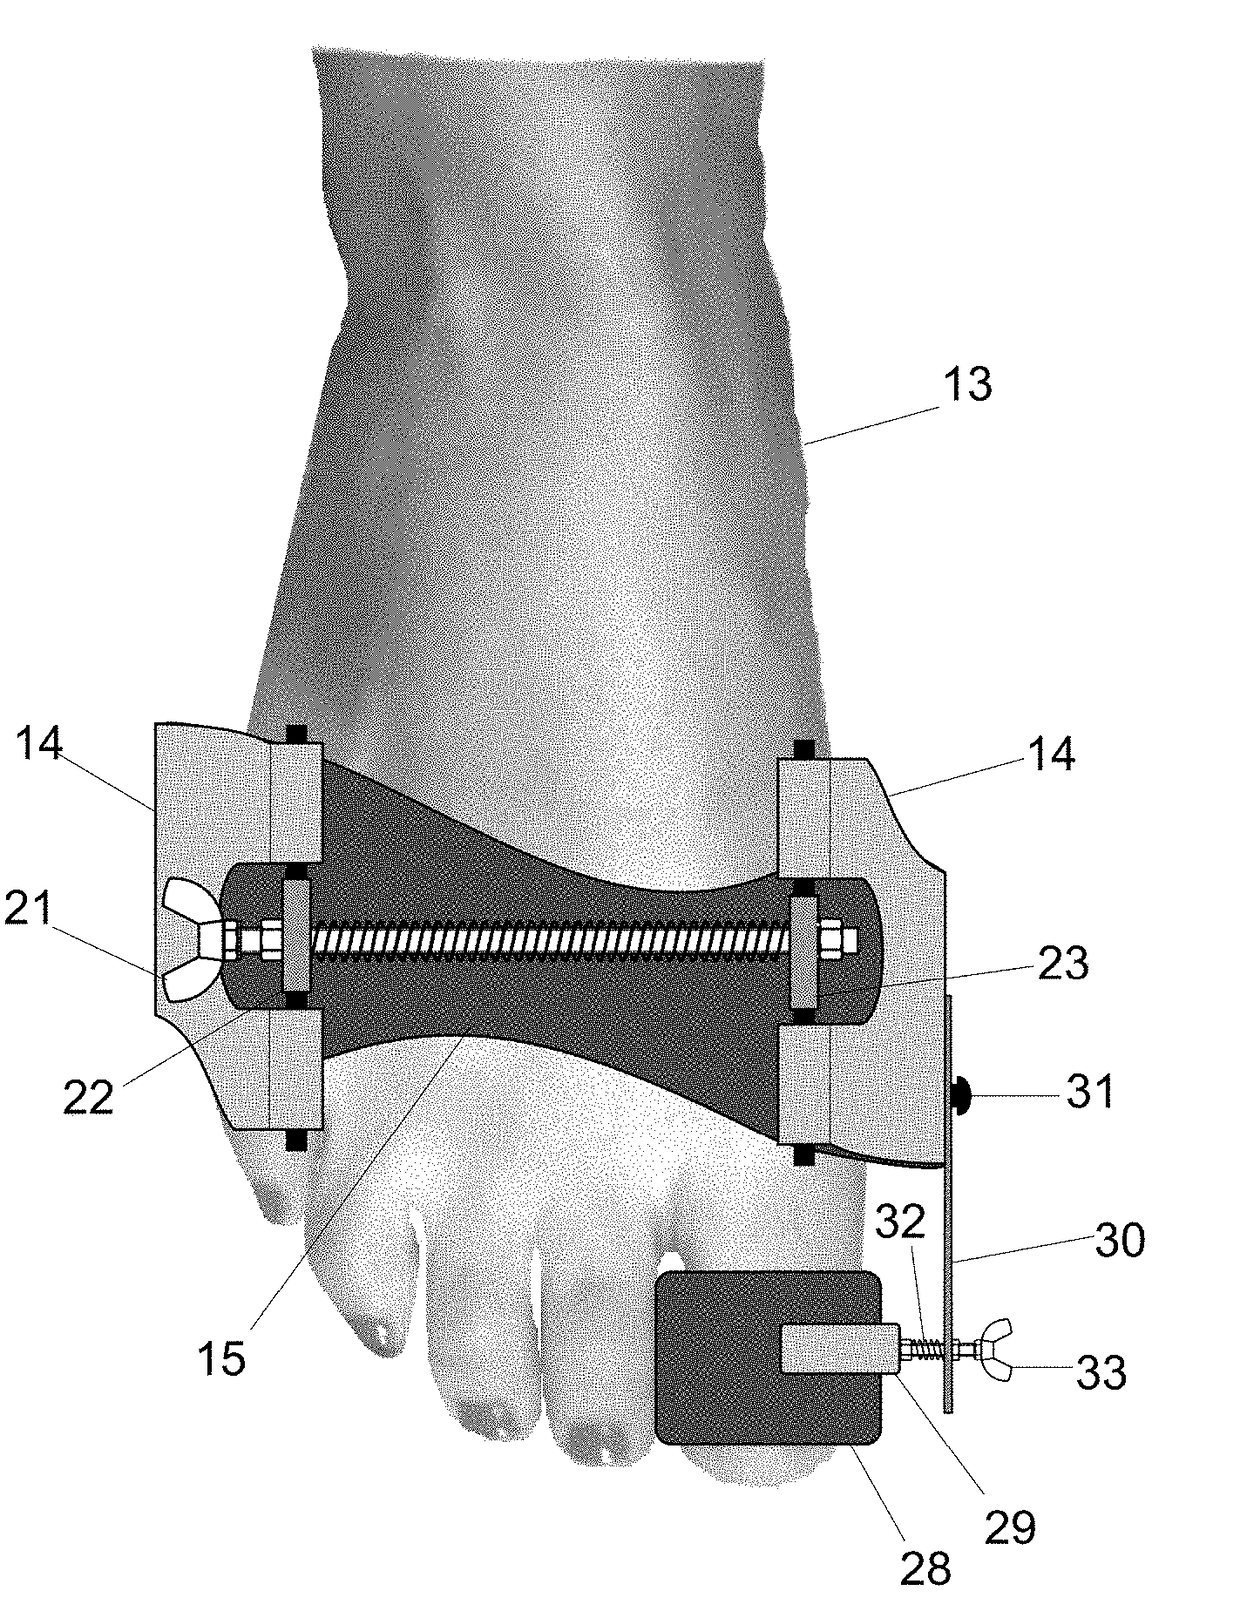 Foot orthosis with comprehensive method for correcting deformities of the transverse arch of the foot in cases of static transverse flatfoot compounded by hallux valgus, with possible preventive and post-operative applications.